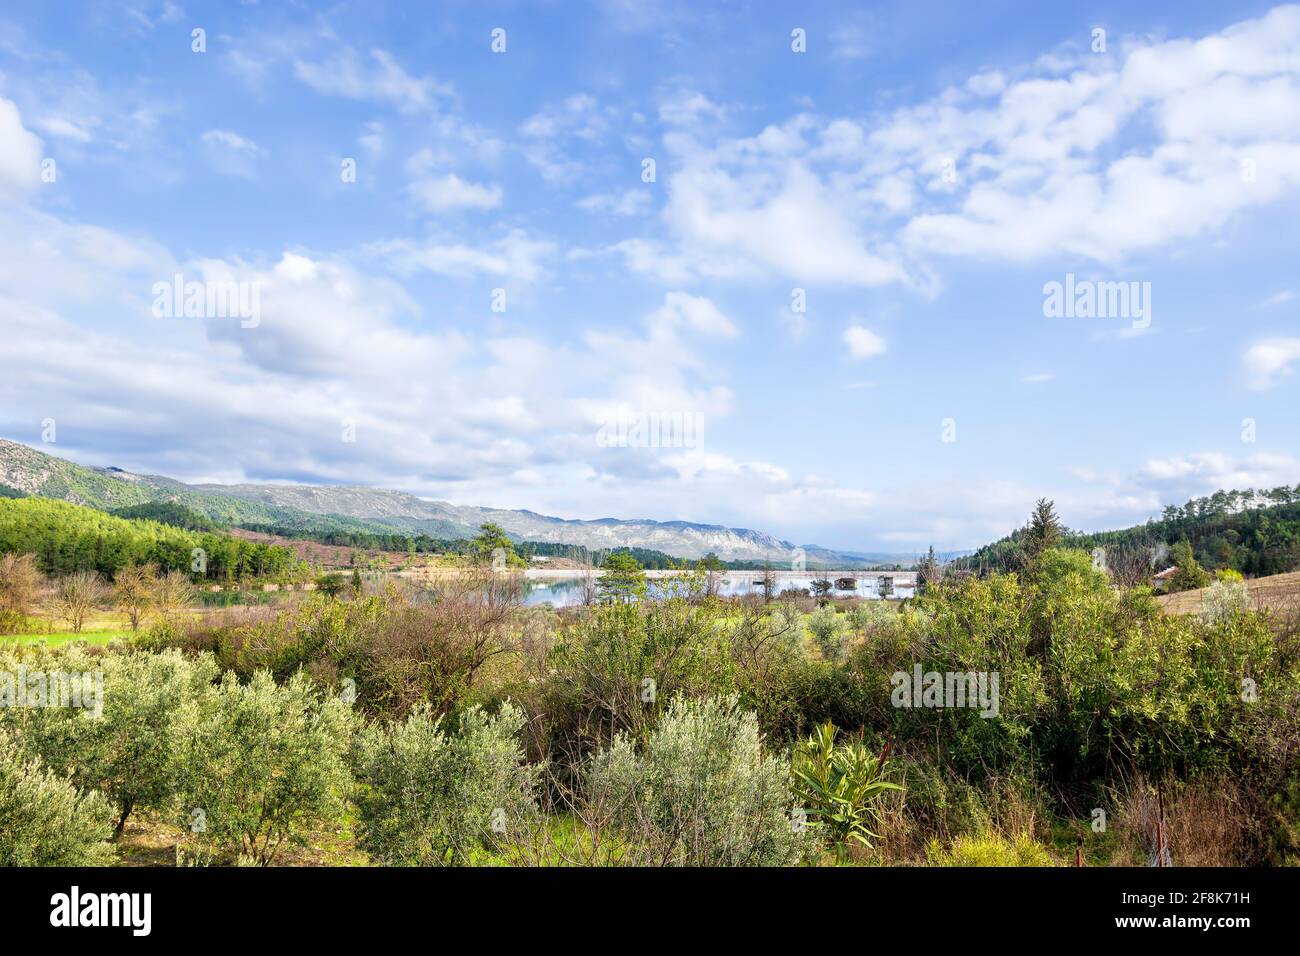 Turkish countryside, olive trees in the foreground, the Taurus mountains in the background Stock Photo